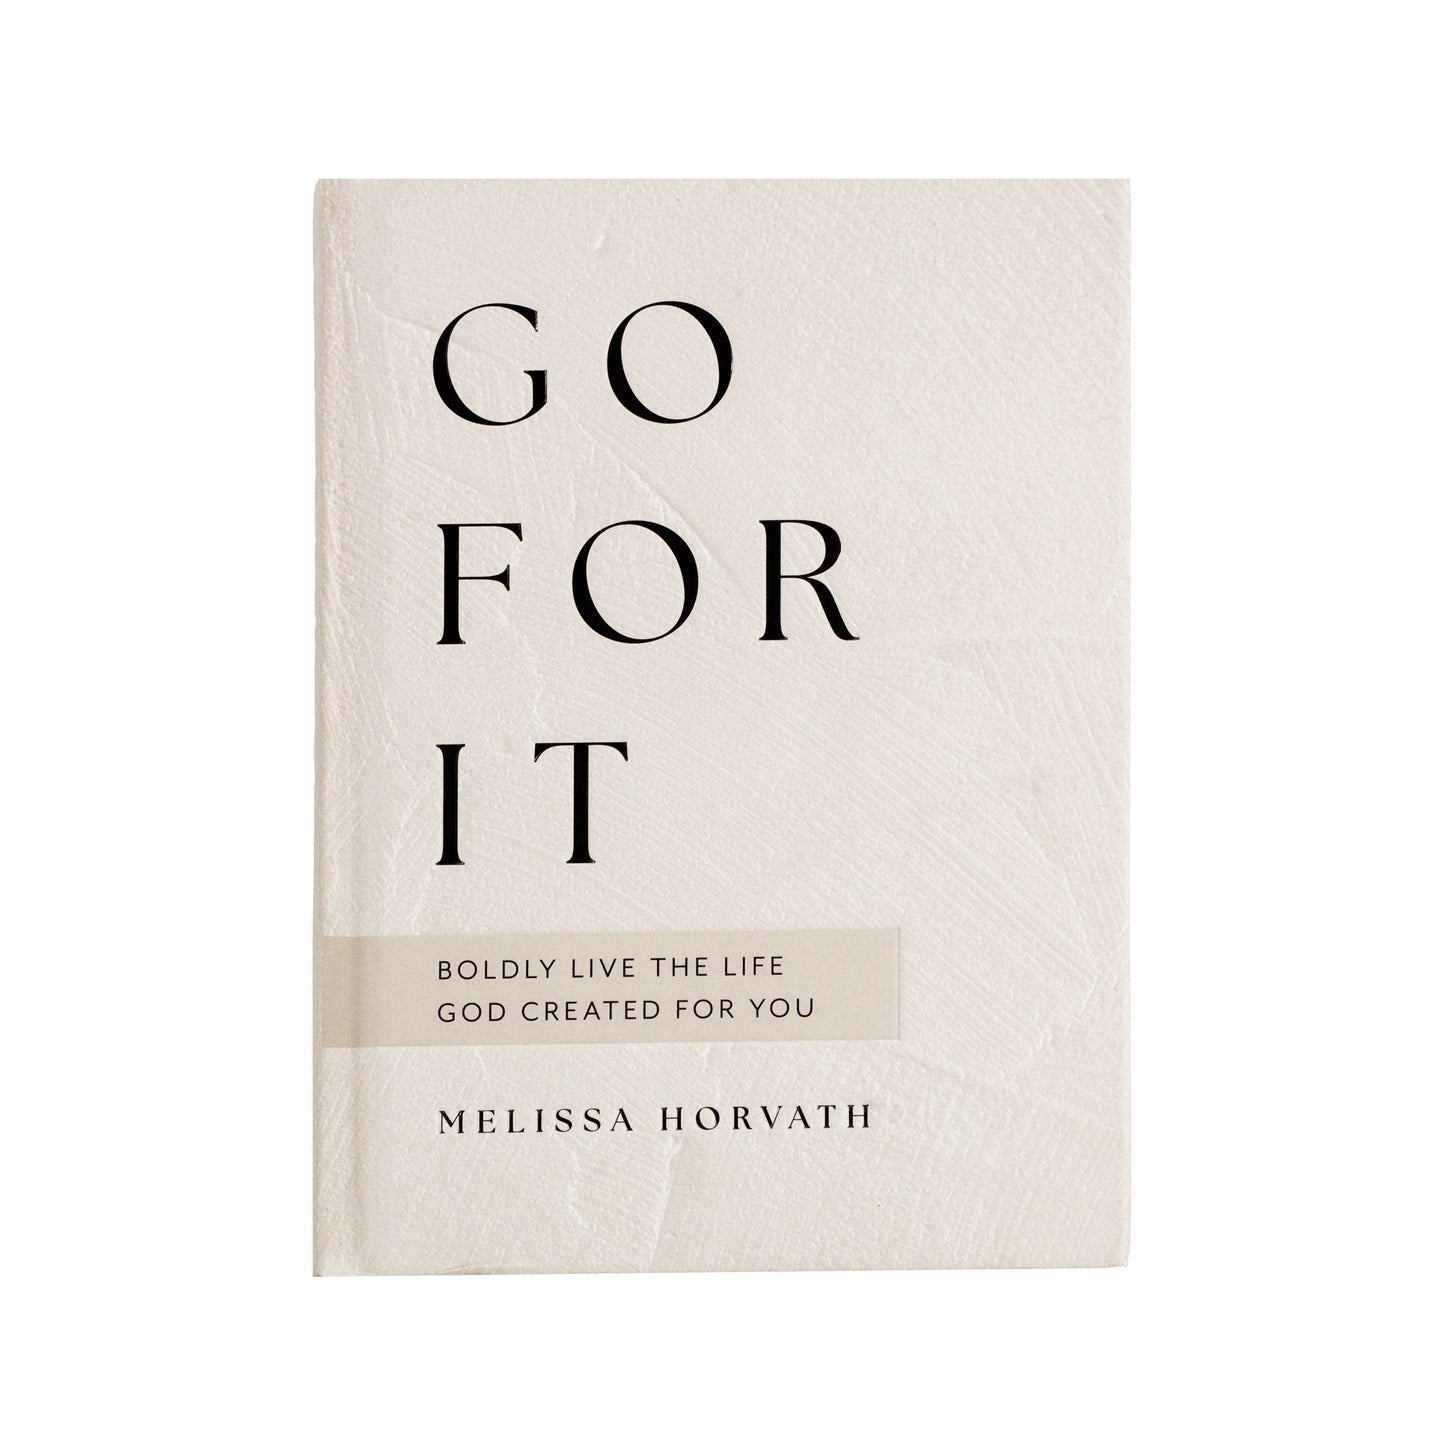 Go for it hard cover book